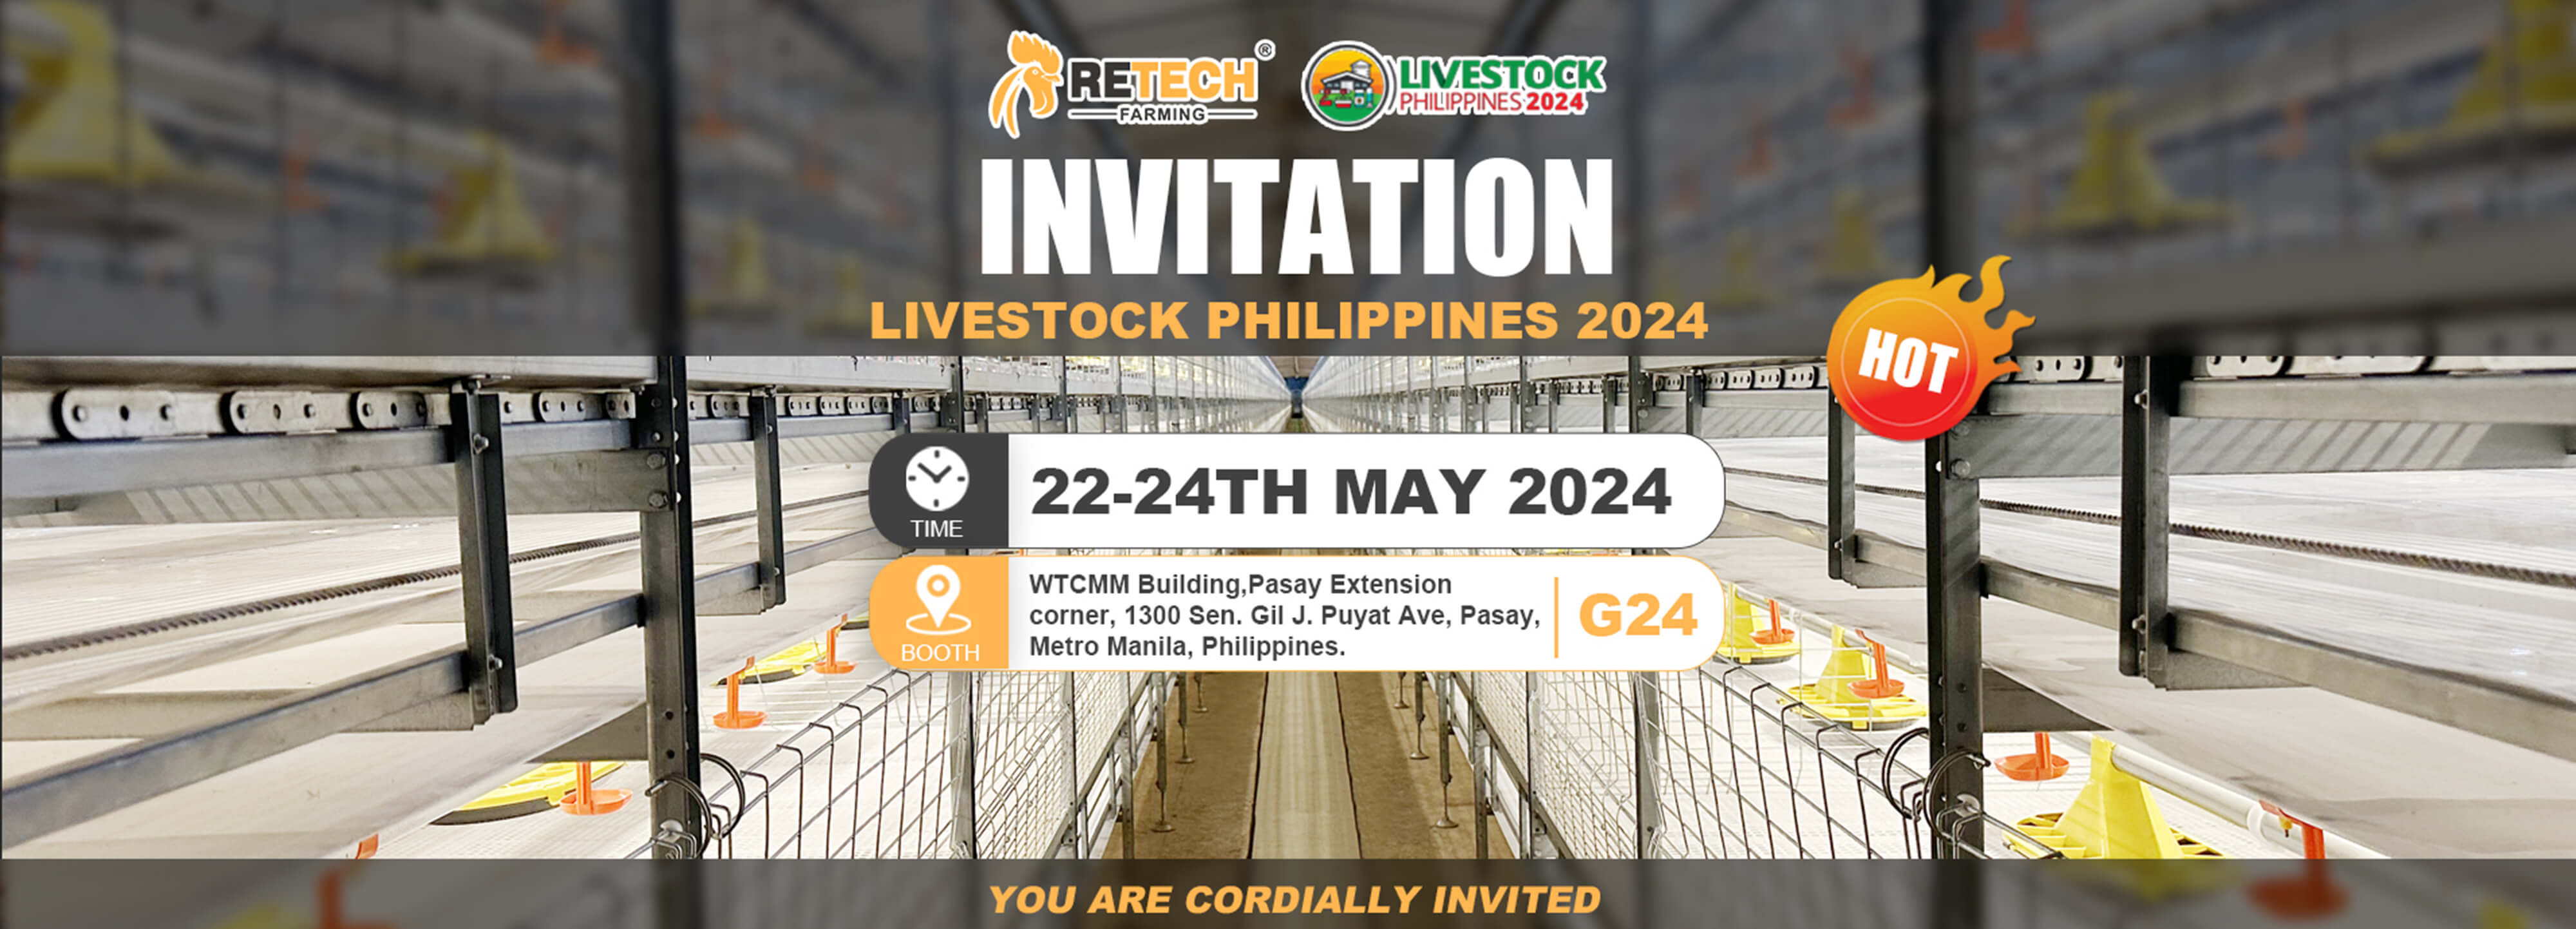 Livestock Industry Exhibition in the Philippines